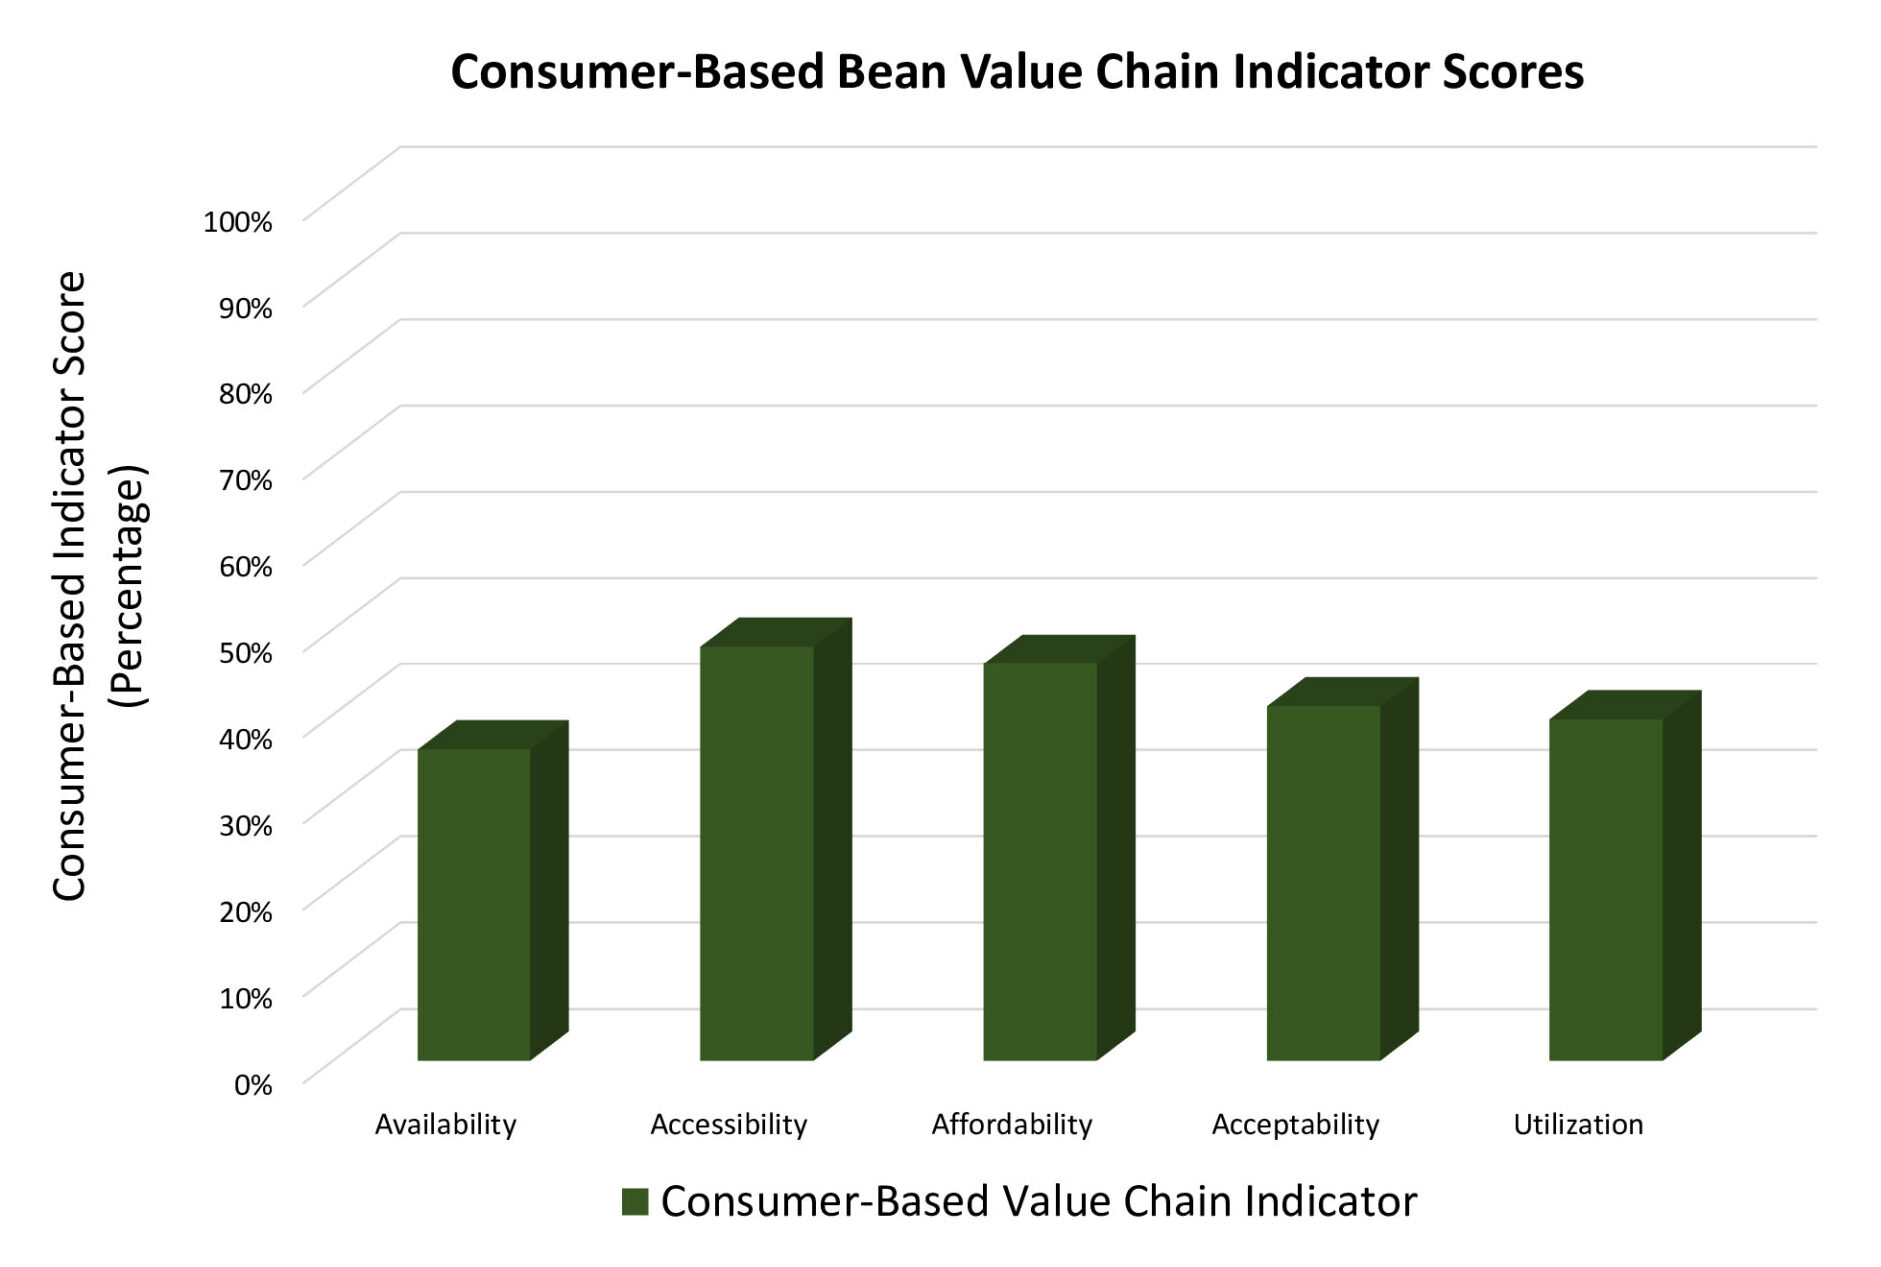 Consumer based value chain indicator scores for beans